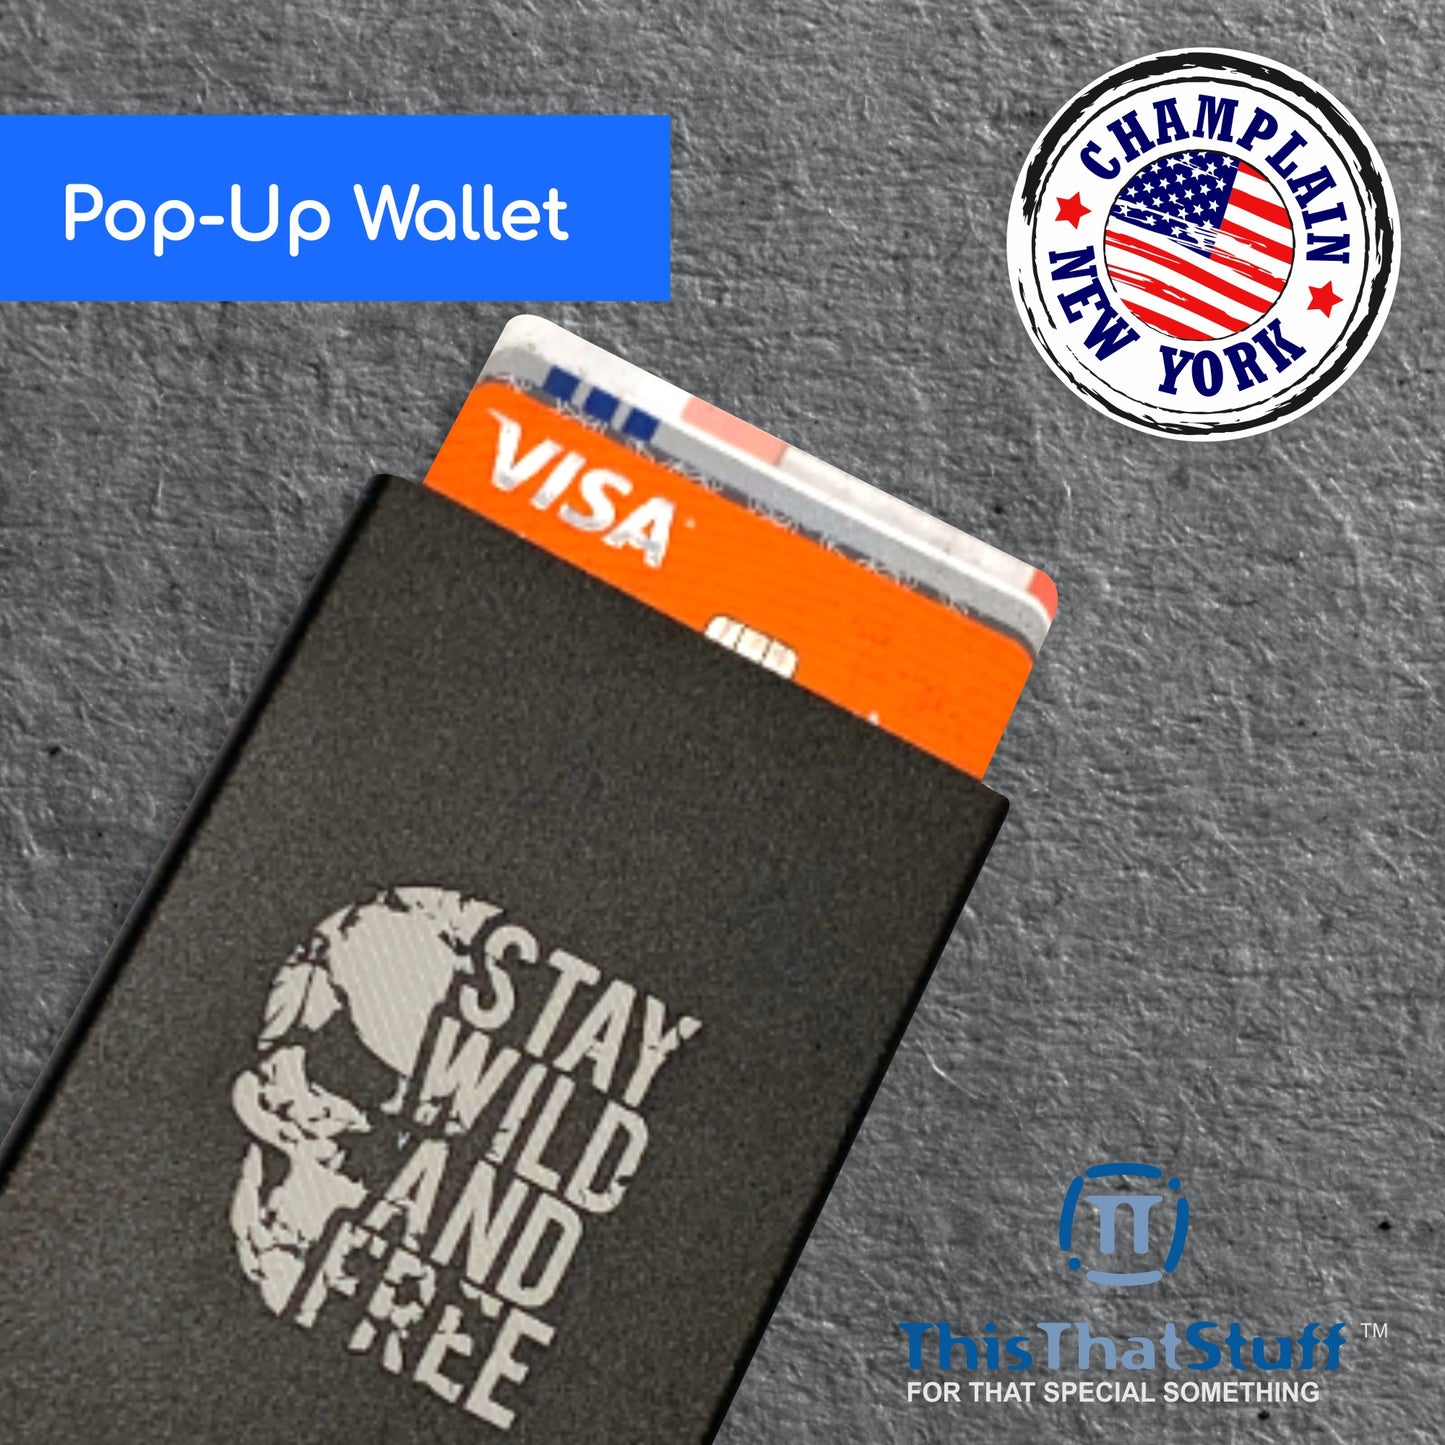 Pop-up Wallet - Aluminum | RFID Secure - Custom Engraved with any Design